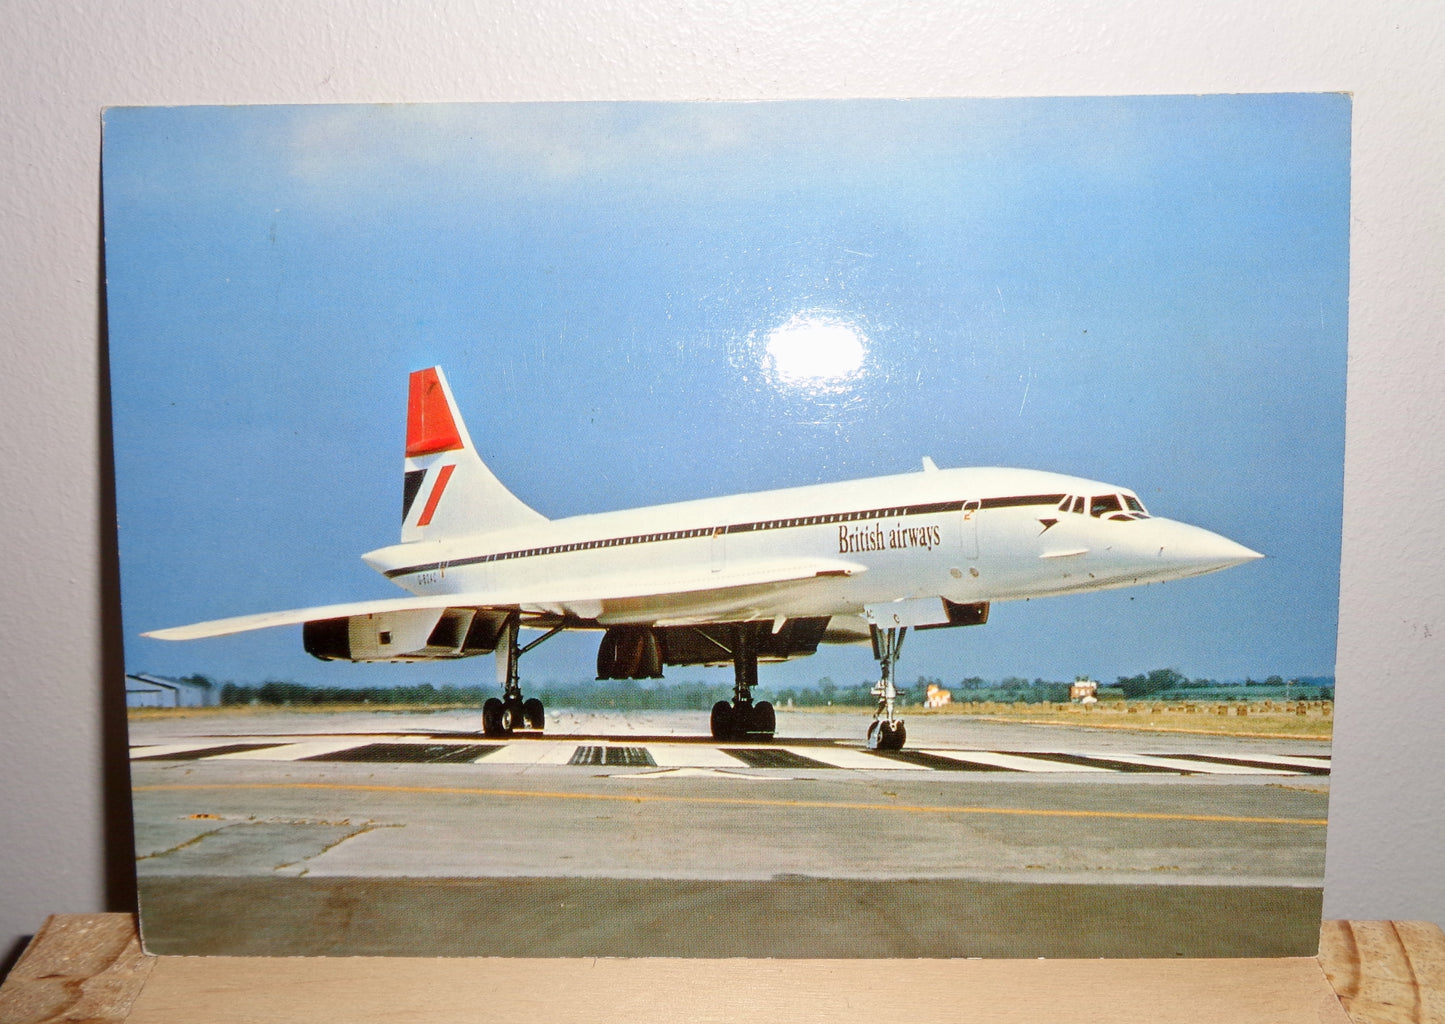 Vintage Concorde Postcard Featuring Concorde On The Tarmac by Beringer & Pampaluchi